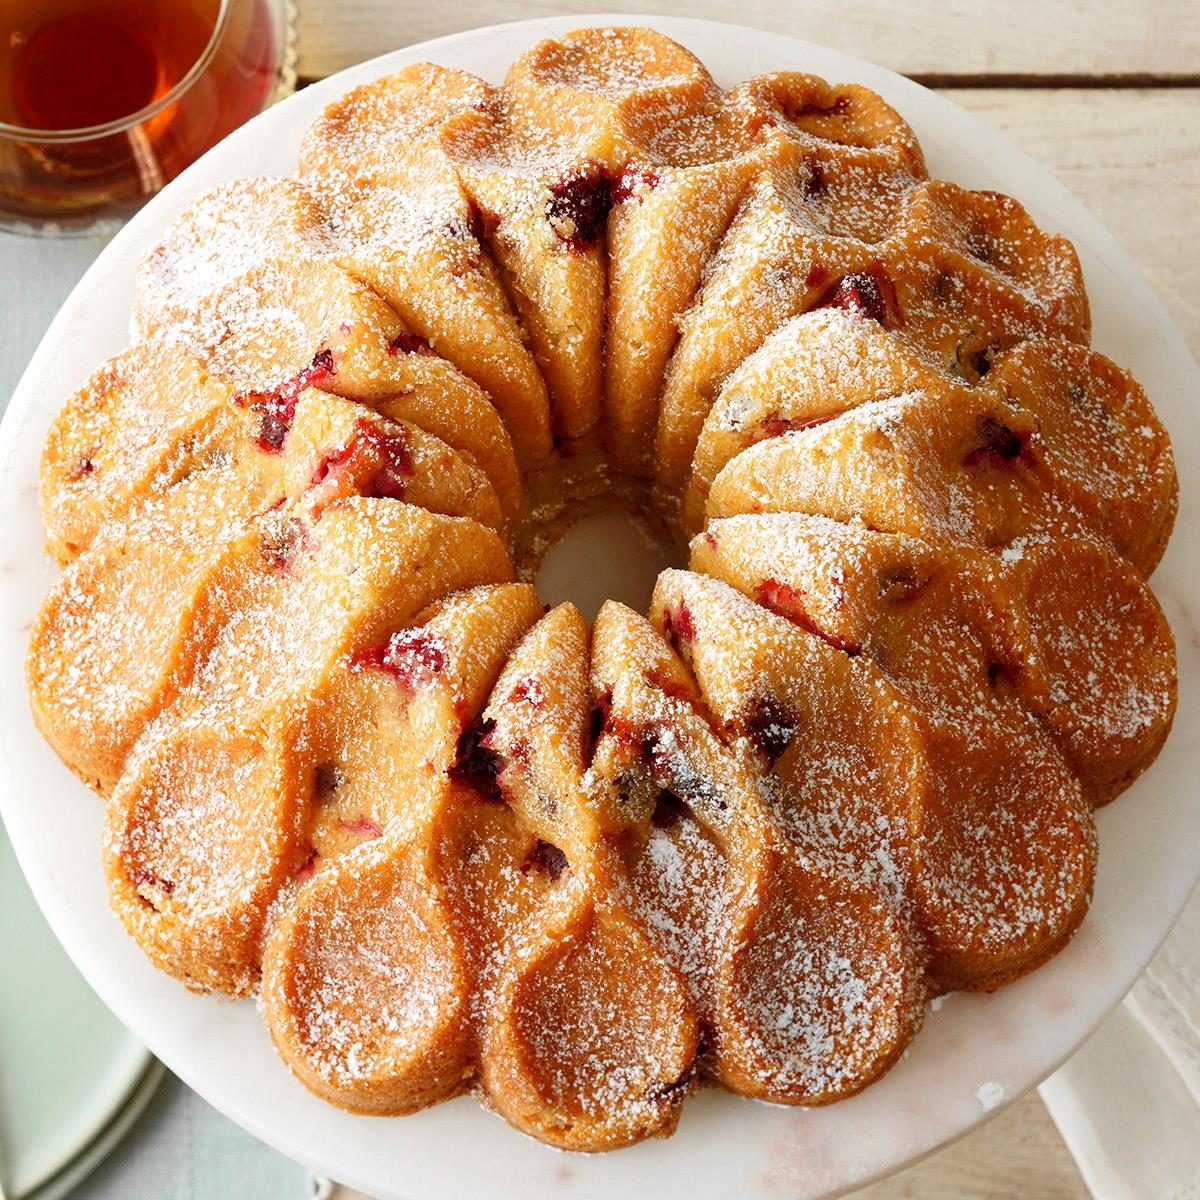 Rich Cranberry Coffee Cake Exps Fbmz22 2495 Dr 04 22 5b 7